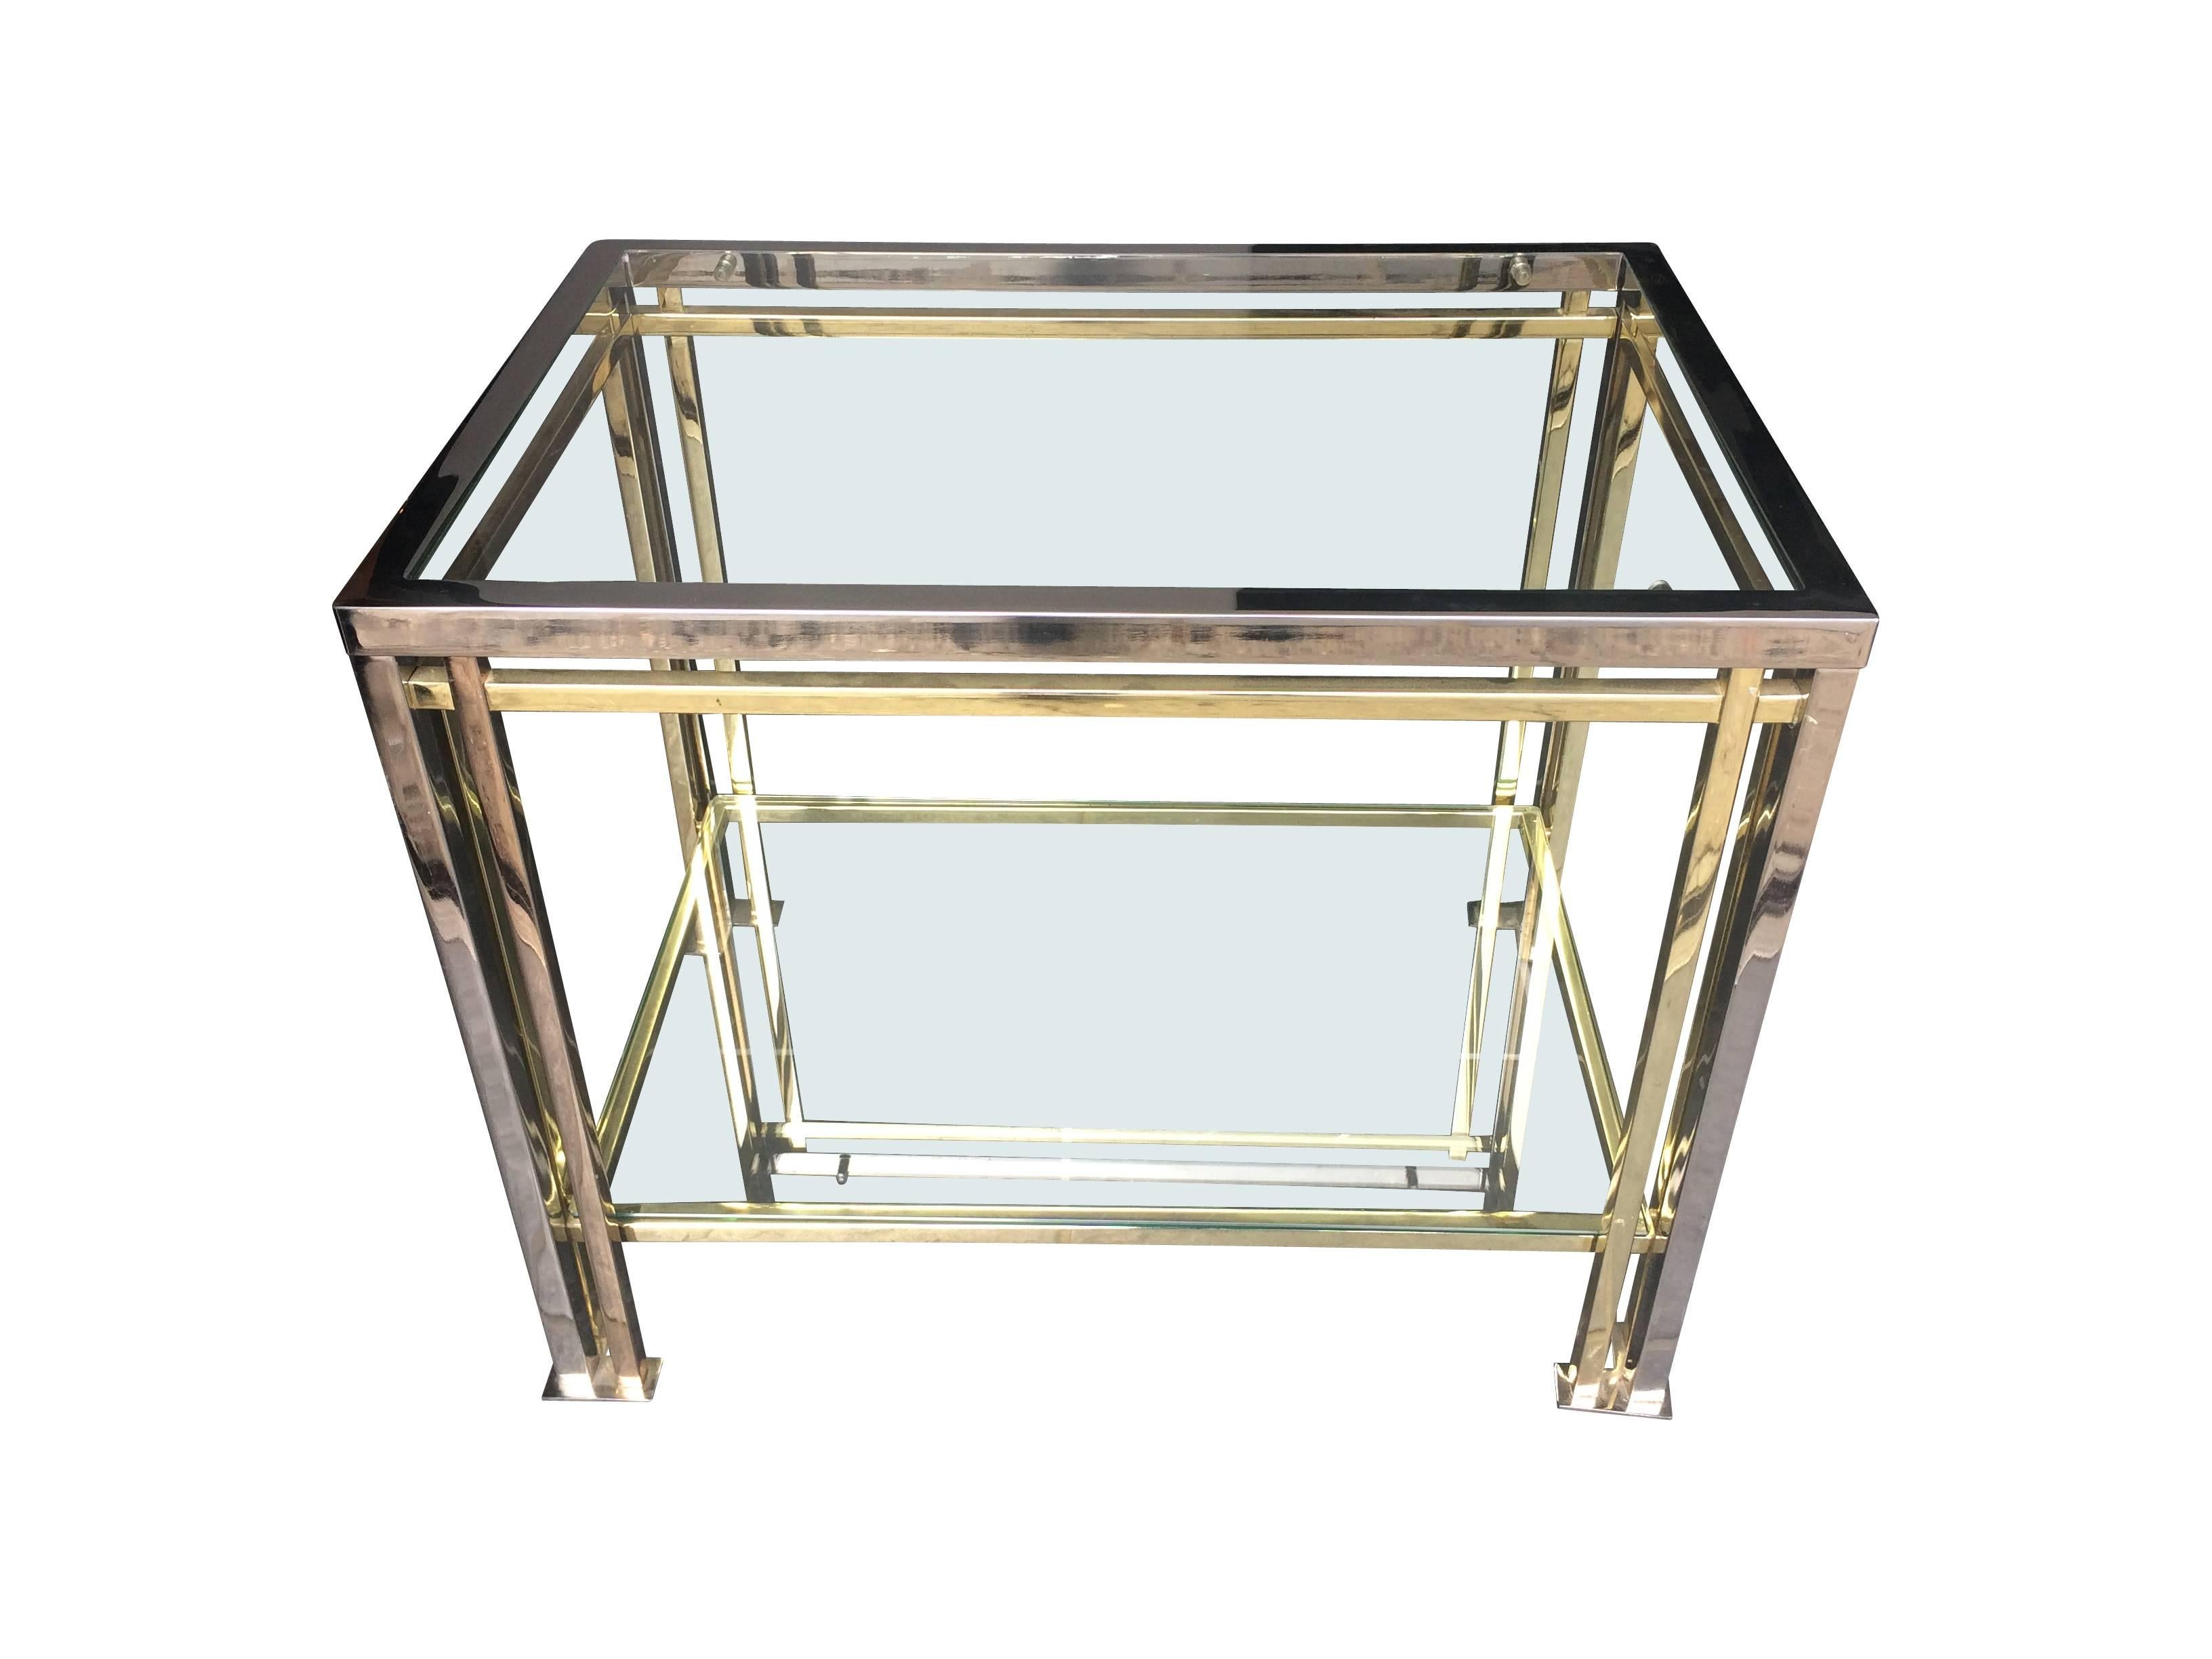 A Romeo Rega brass and chrome side table, with two glass shelves. 
Also available is similar style matching side table in castors see other listing.